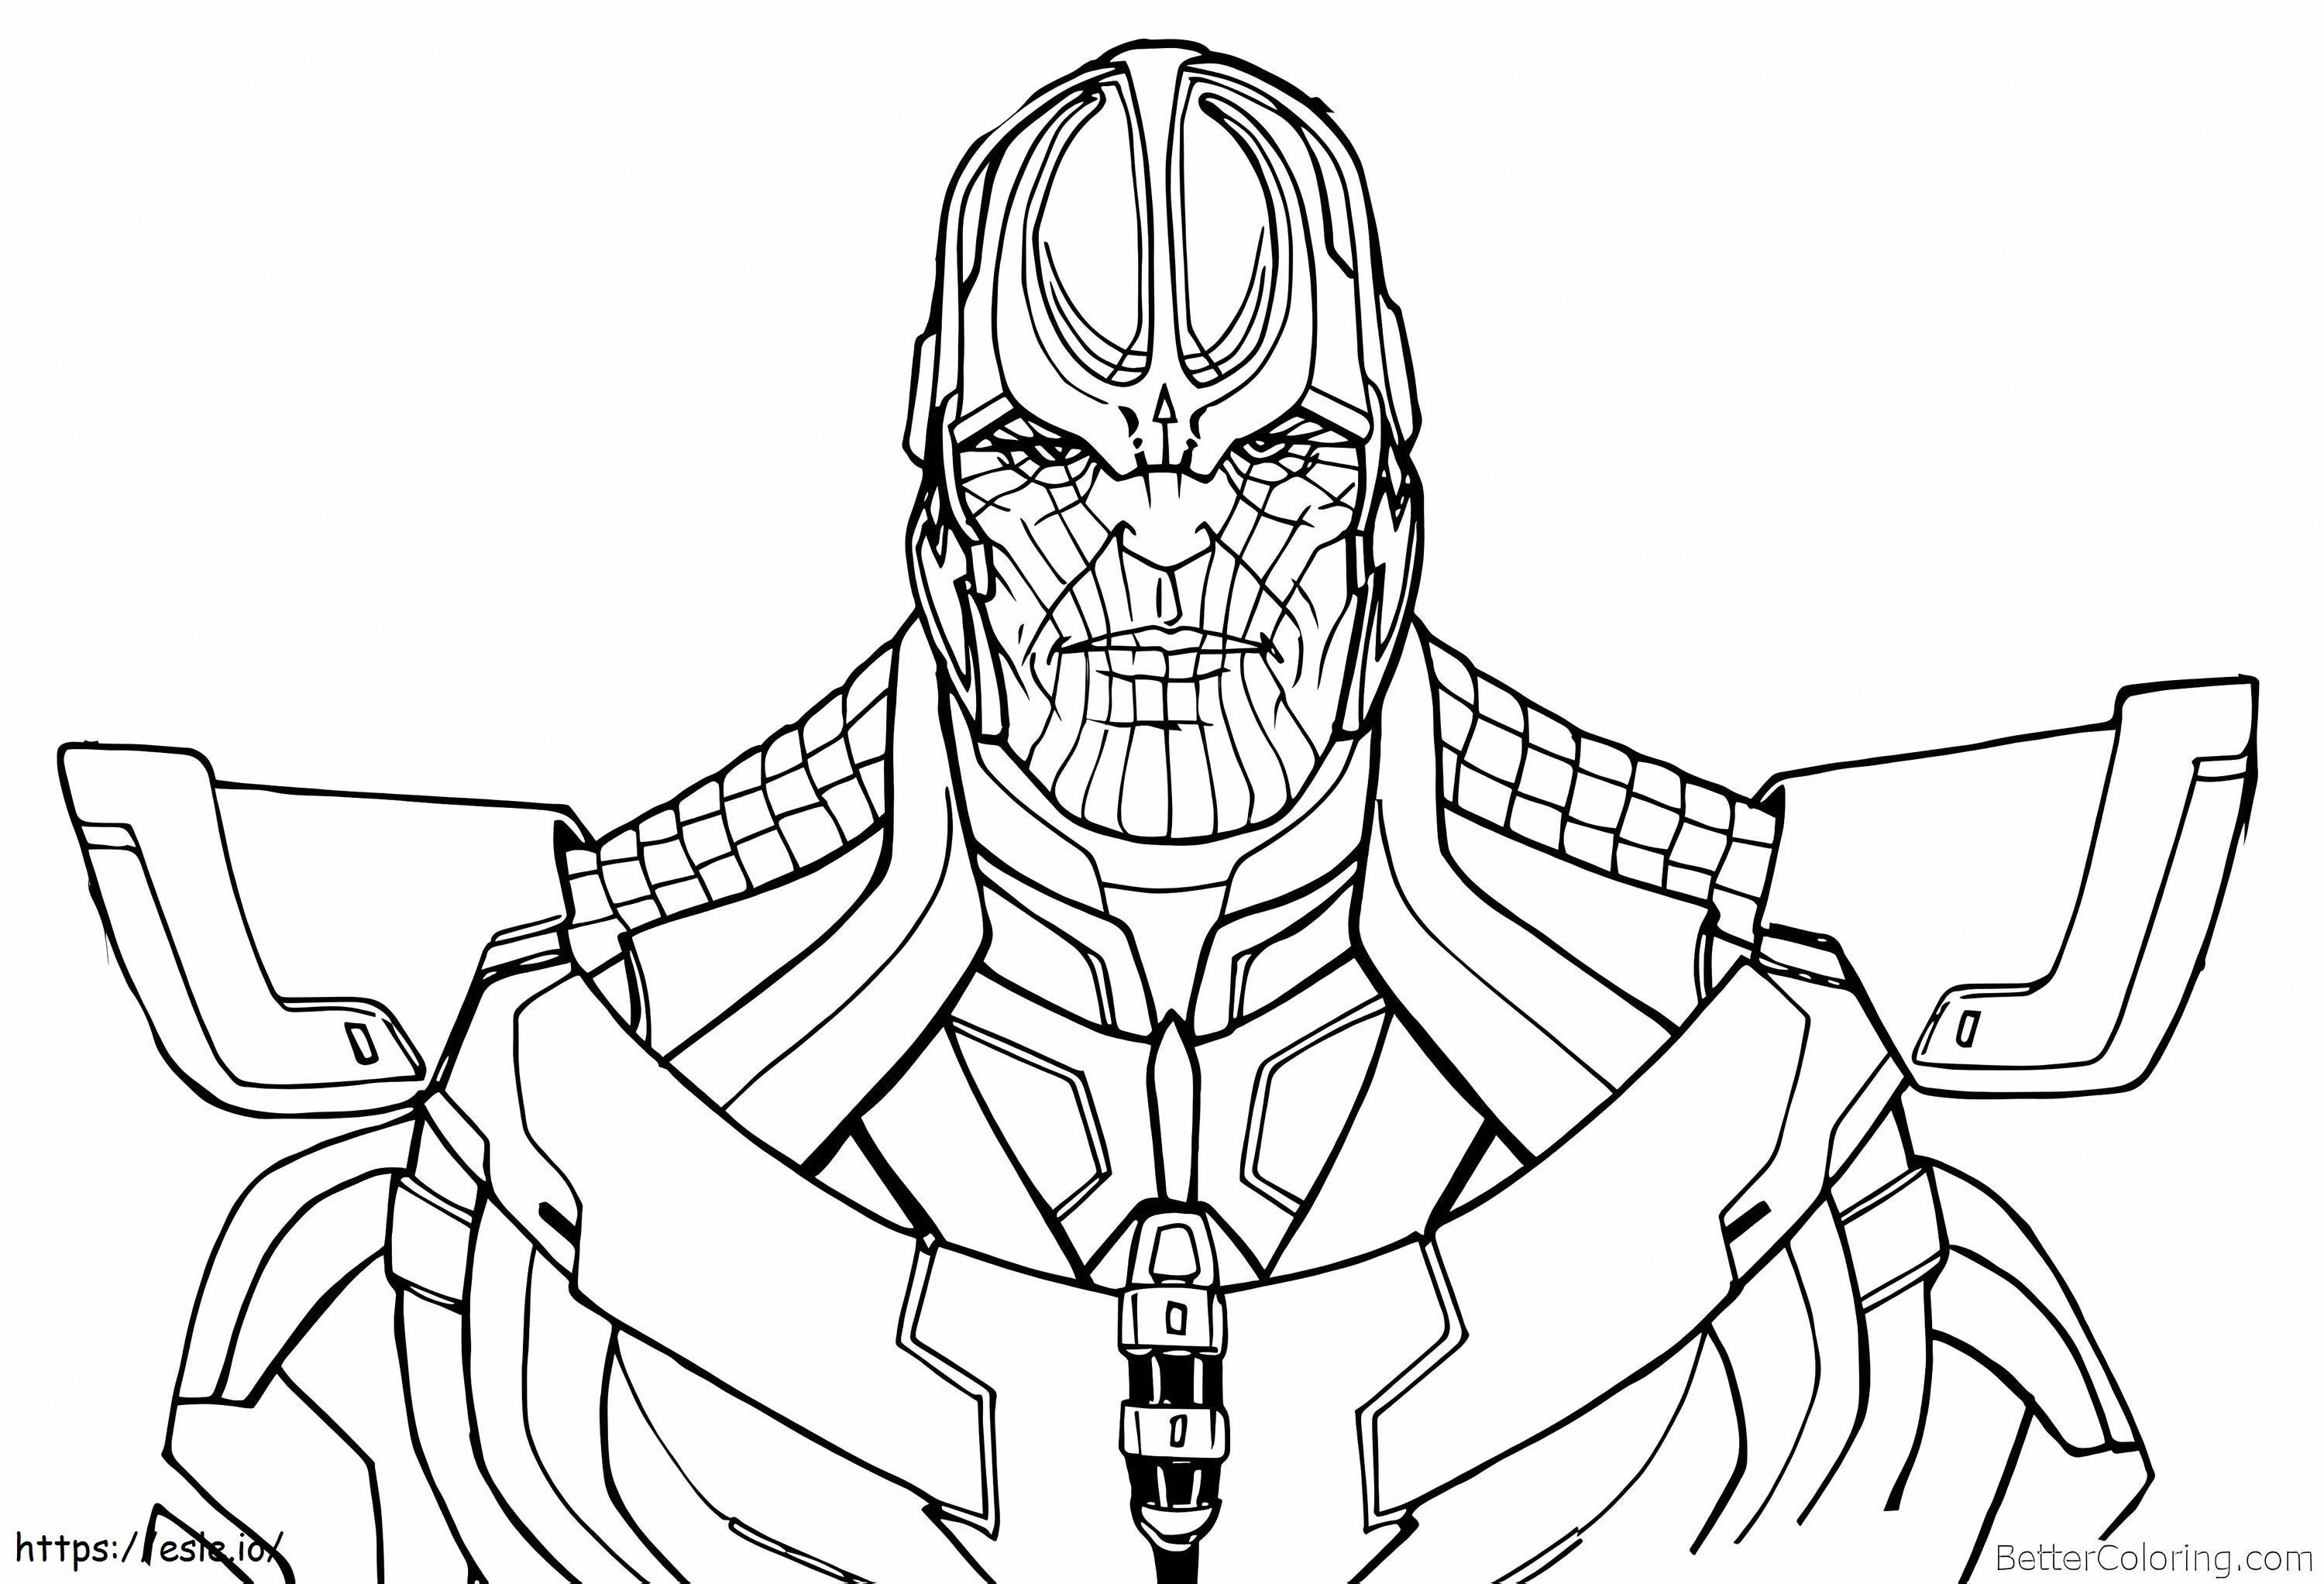 1540288368 Thanos From Avengers Infinity War Line Drawing coloring page